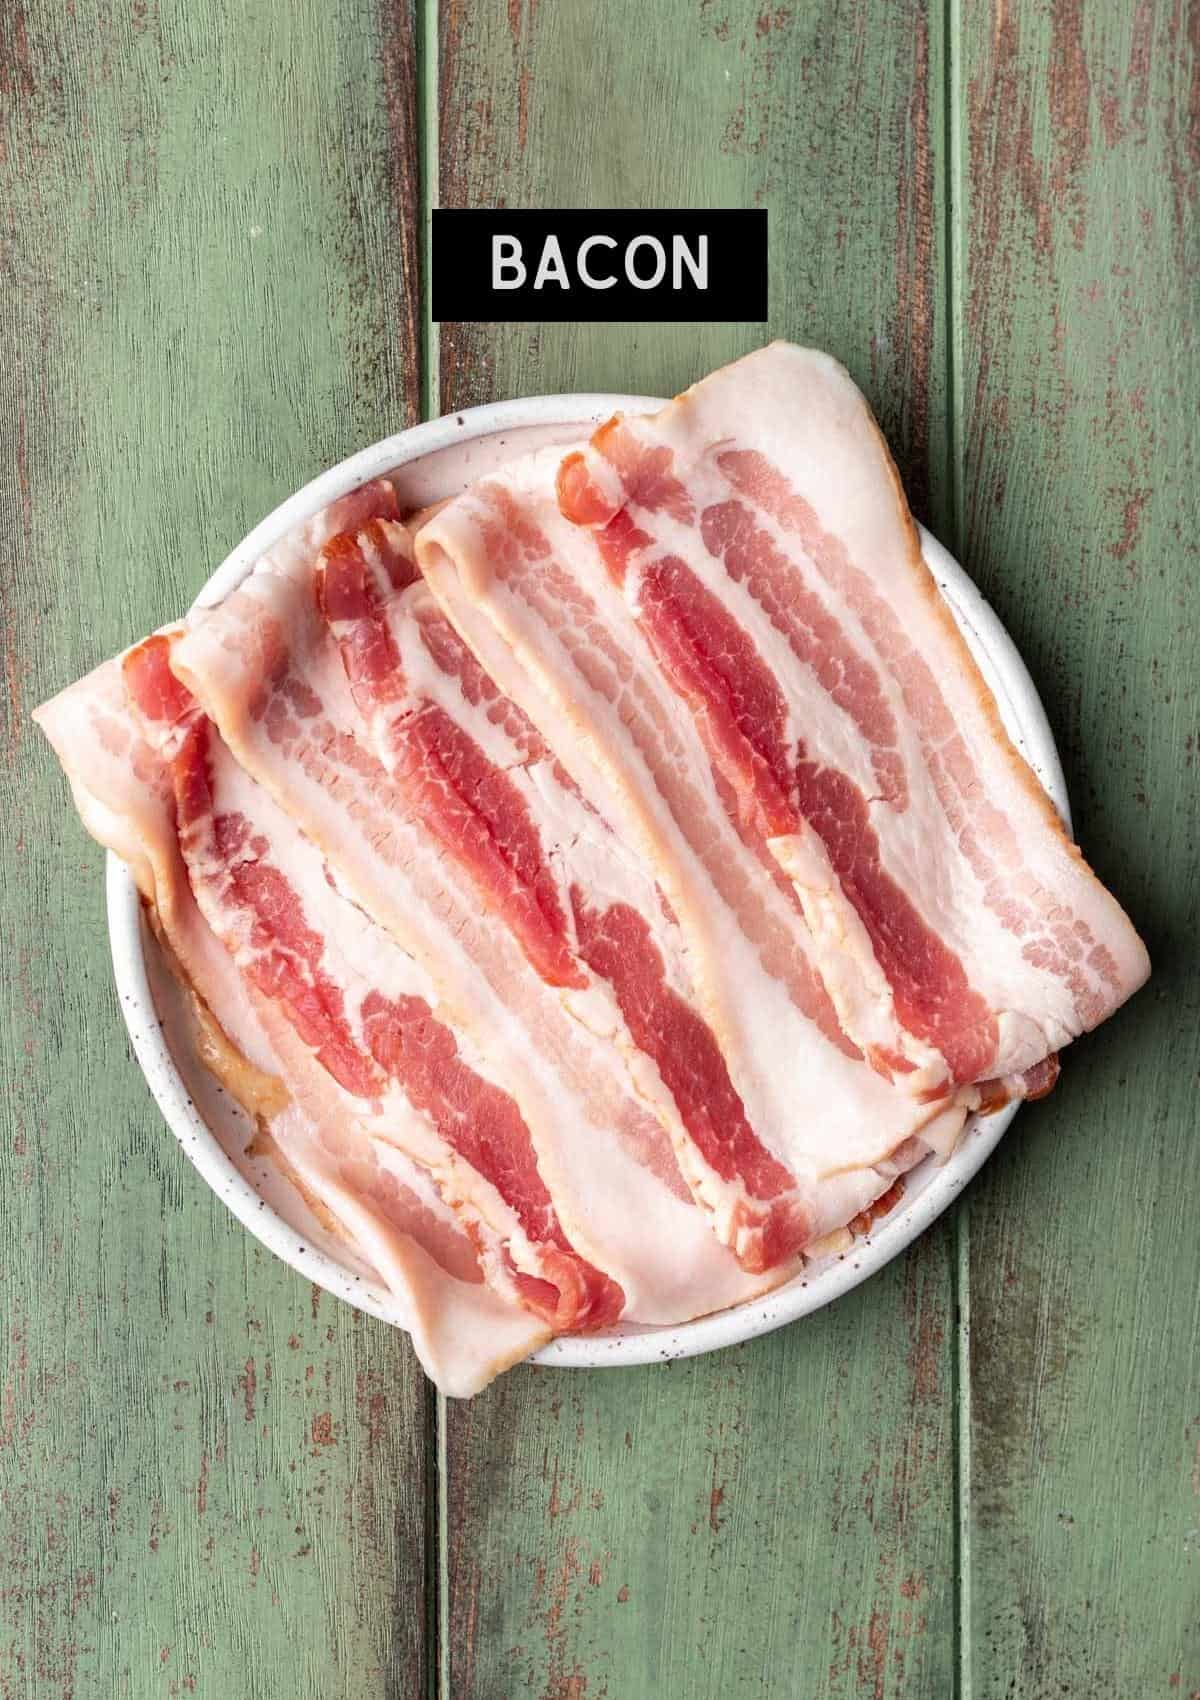 Labelled ingredients for instant pot bacon (see recipe for details).